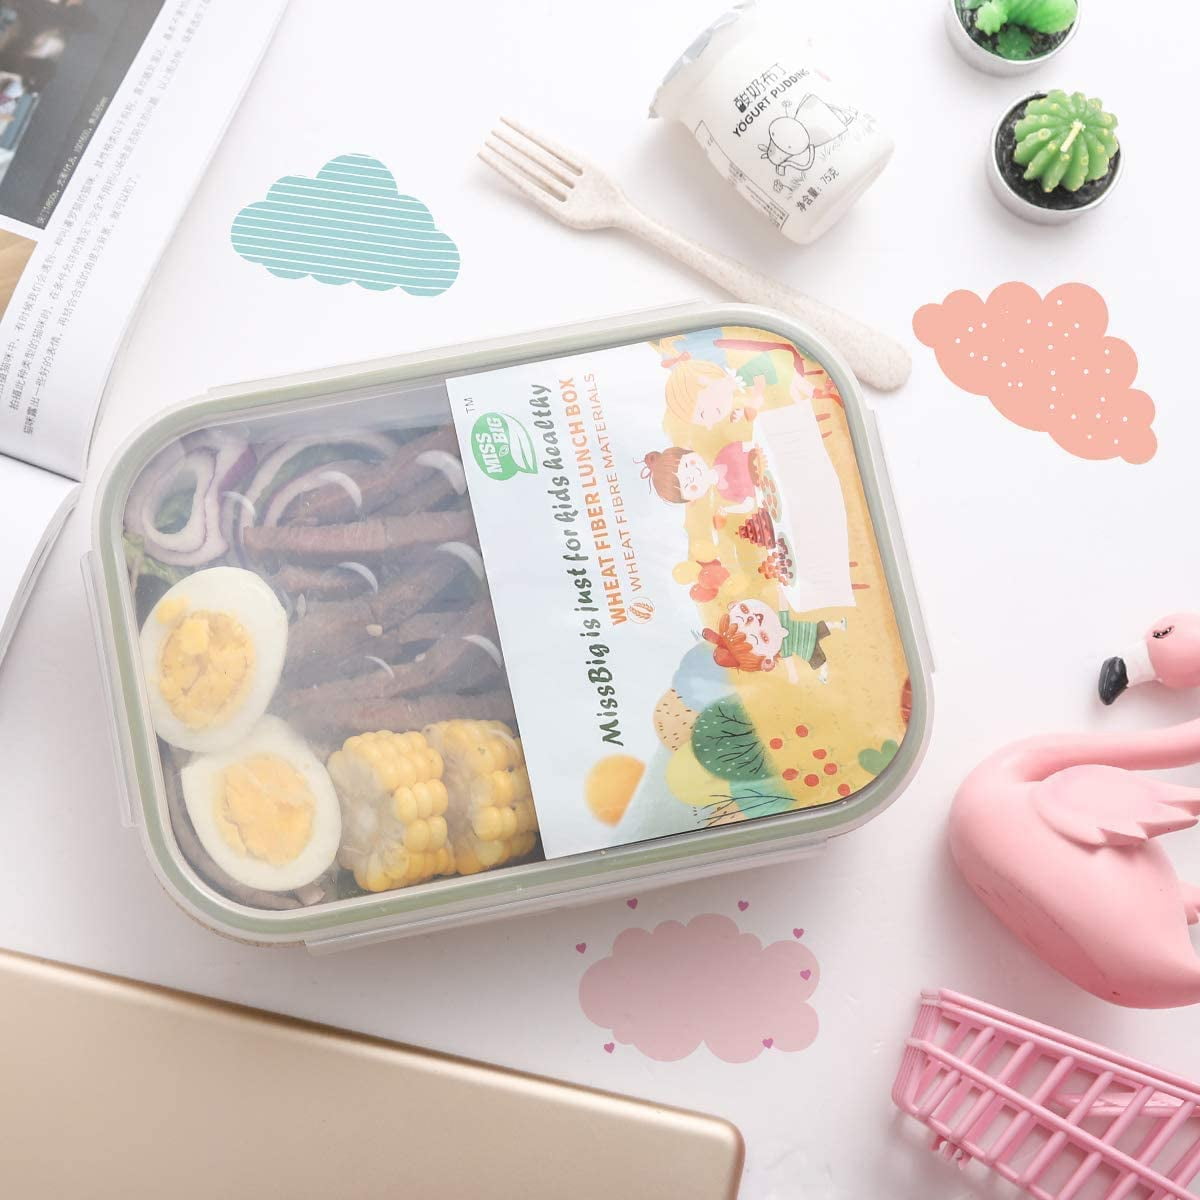  MISS BIG Bento Box,Bento Box Adult Lunch Box,Ideal Leak Proof Bento  Box,Mom's Choice Kids Lunch Box,No BPAs and No Chemical Dyes,Microwave and  Dishwasher Safe Bento Lunch Box: Home & Kitchen